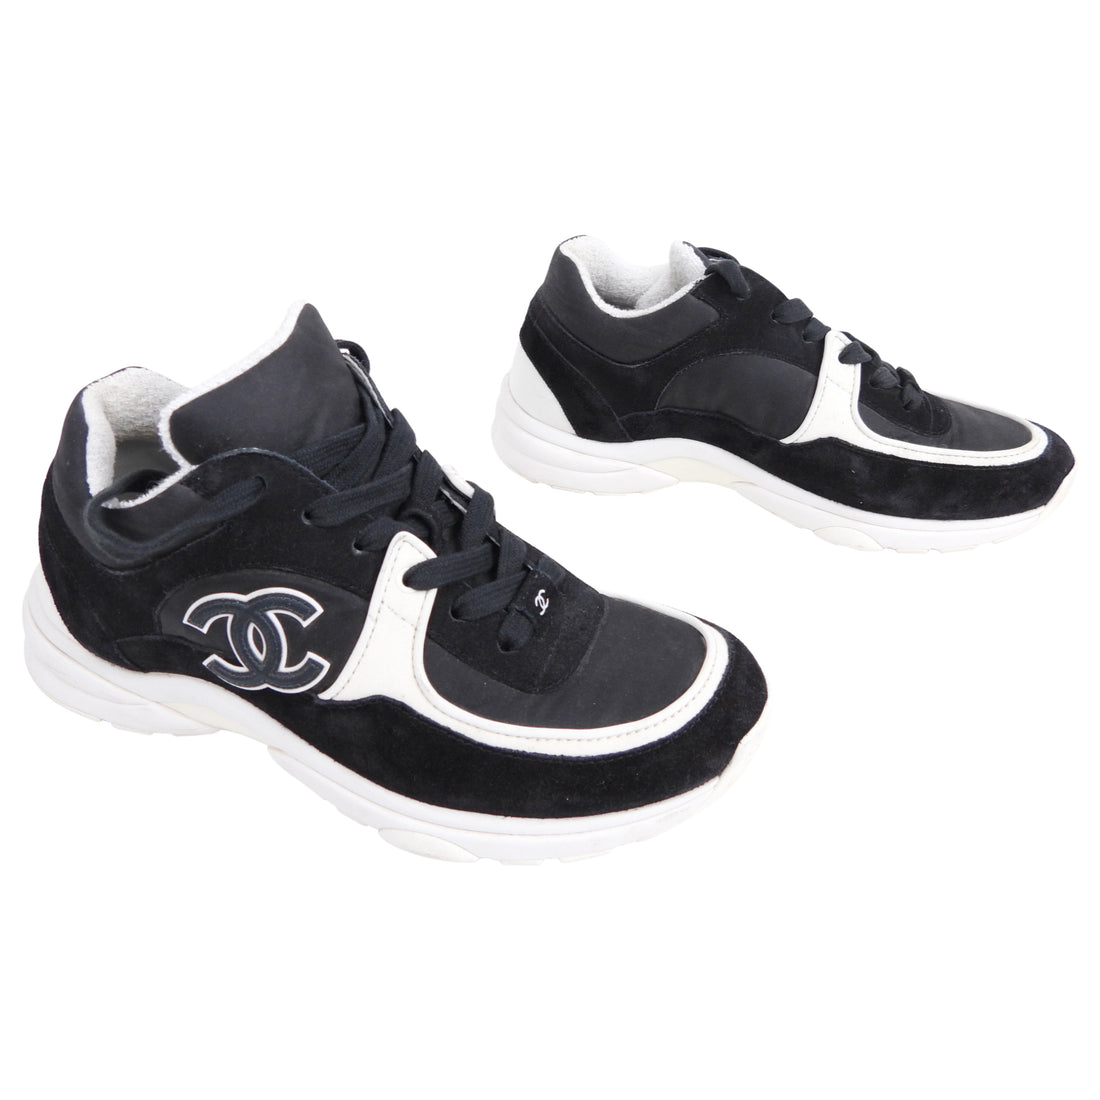 Chanel Black and White Suede CC Logo Lace Up Sneakers - 36.5